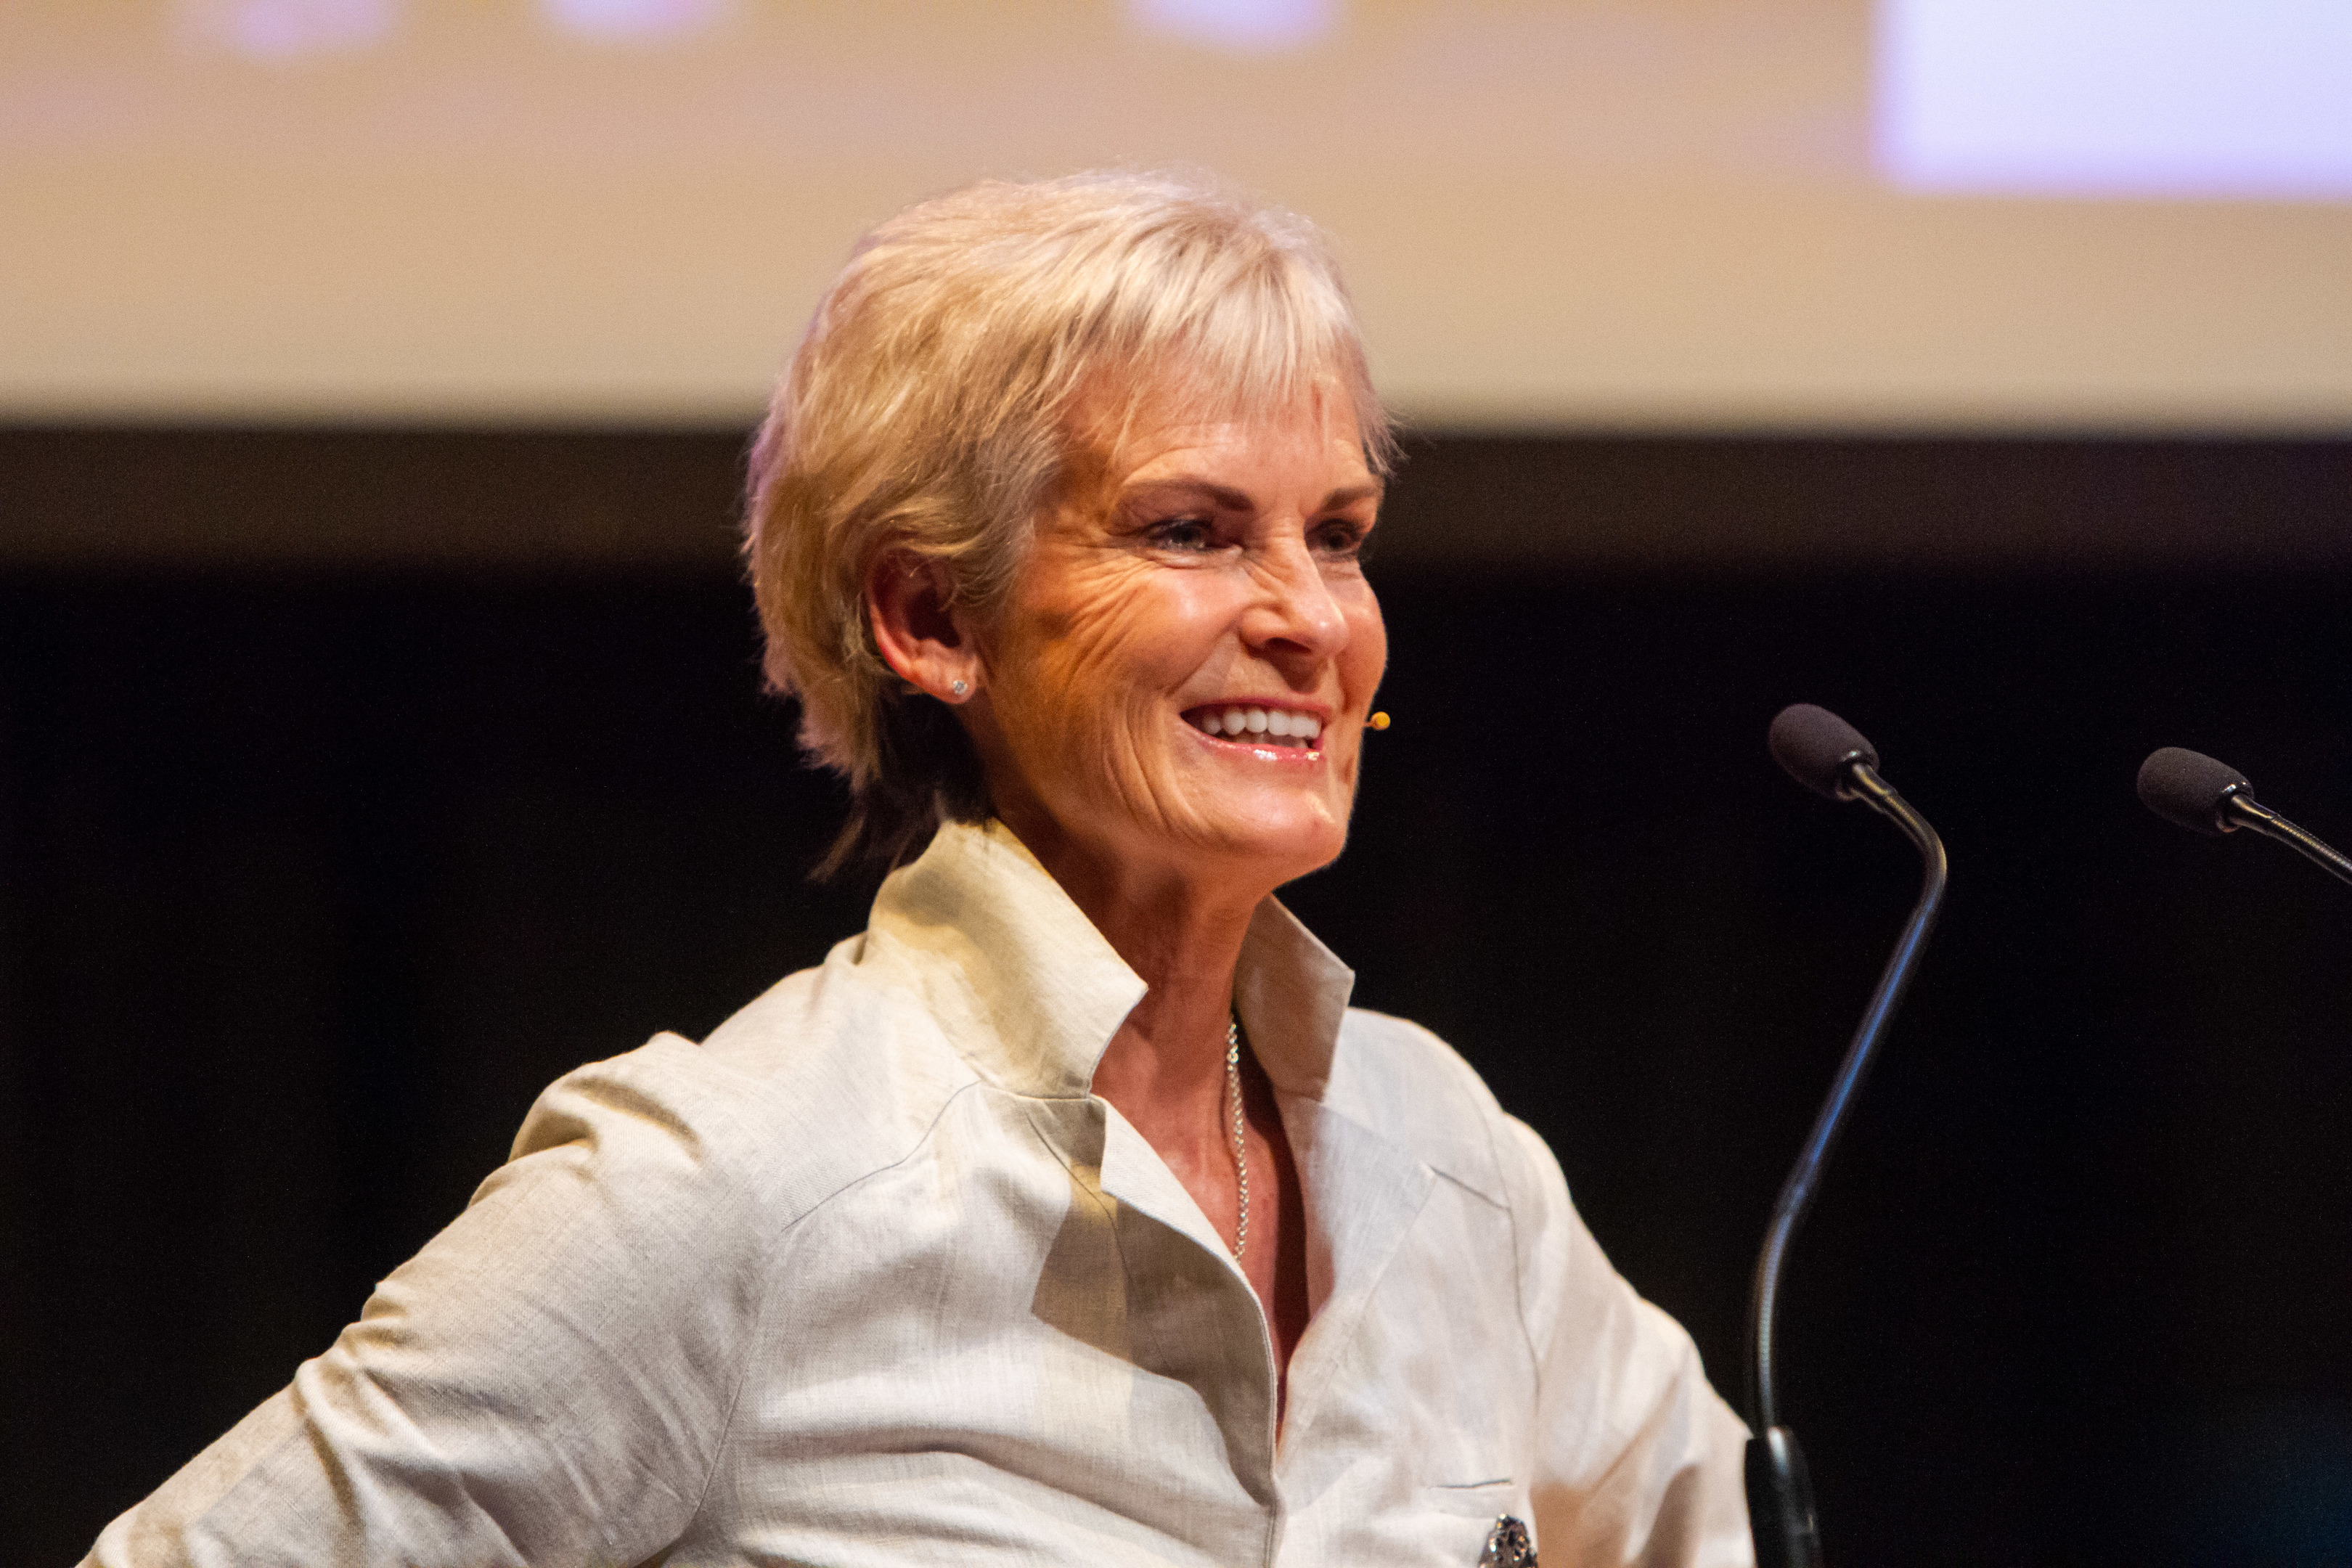 Judy Murray speaking at the Association of Scottish Businesswomen's annual conference.